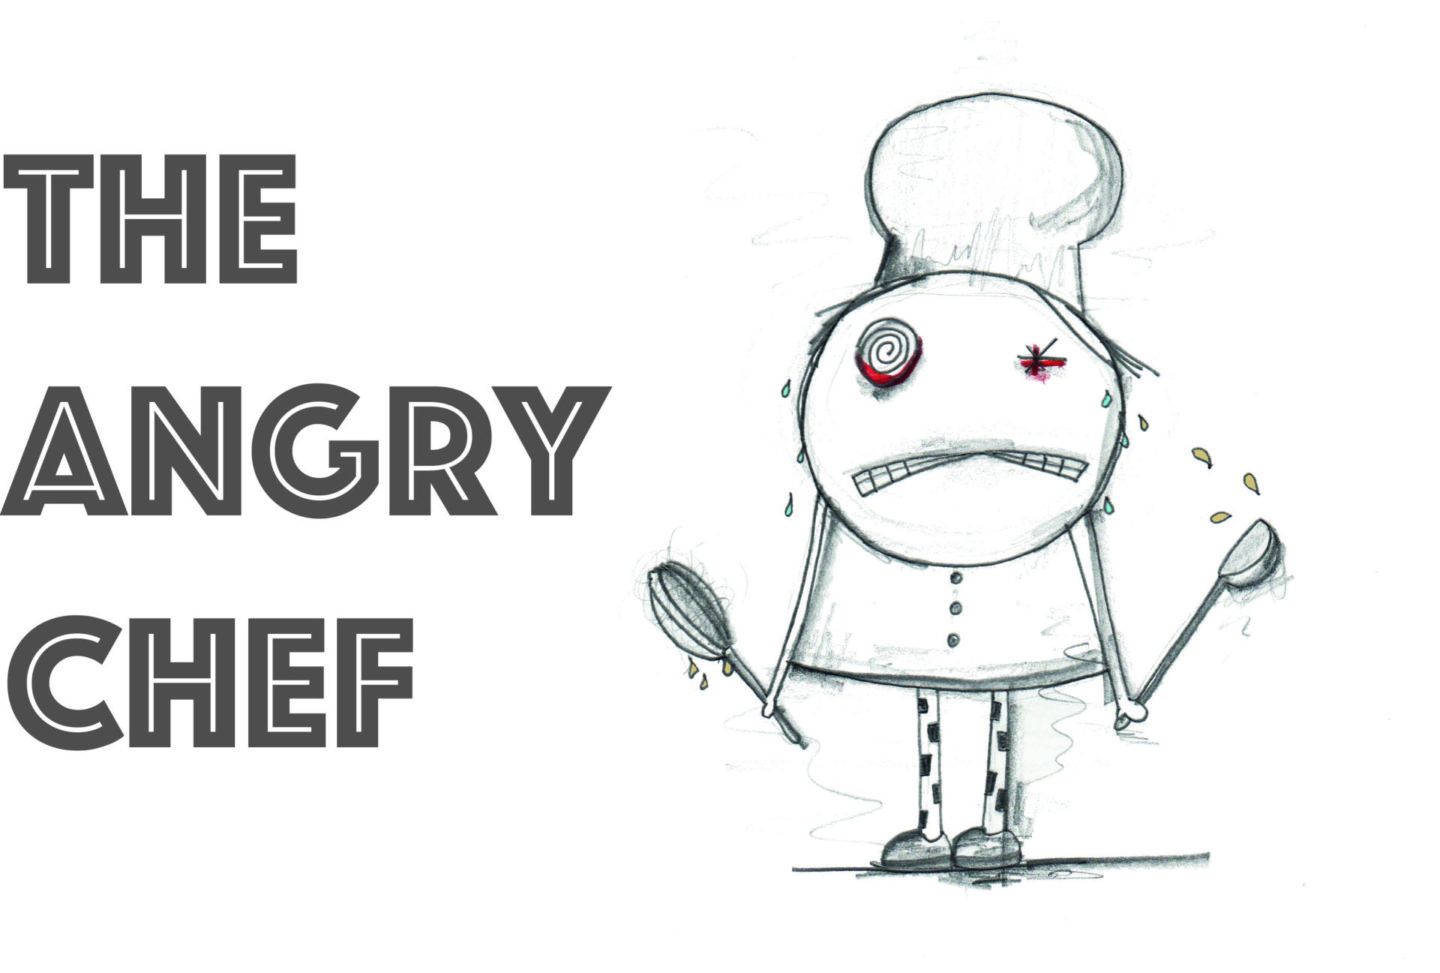 THE ANGRY CHEF: ‘SURPRISINGLY, SOME PEOPLE JUST REALLY LIKE KALE’